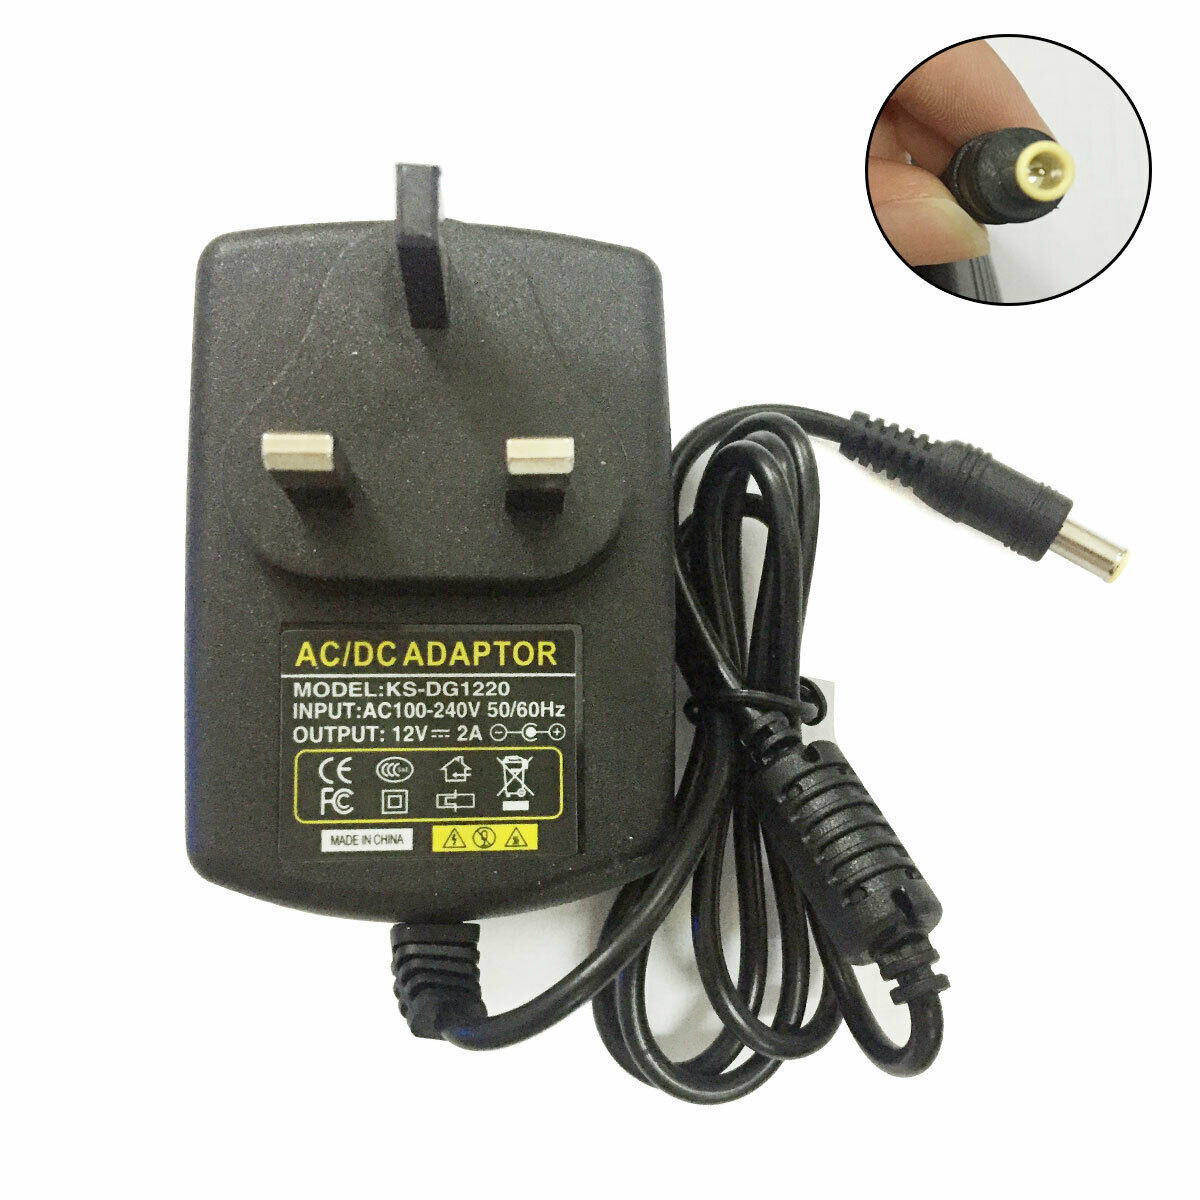 12V 1.5A-2A 5.5*3.0mm AC Adapter for Sony AC-M1208 DVD Blu-ray Disc Player UK Brand: Unbranded MPN: Does Not Apply T